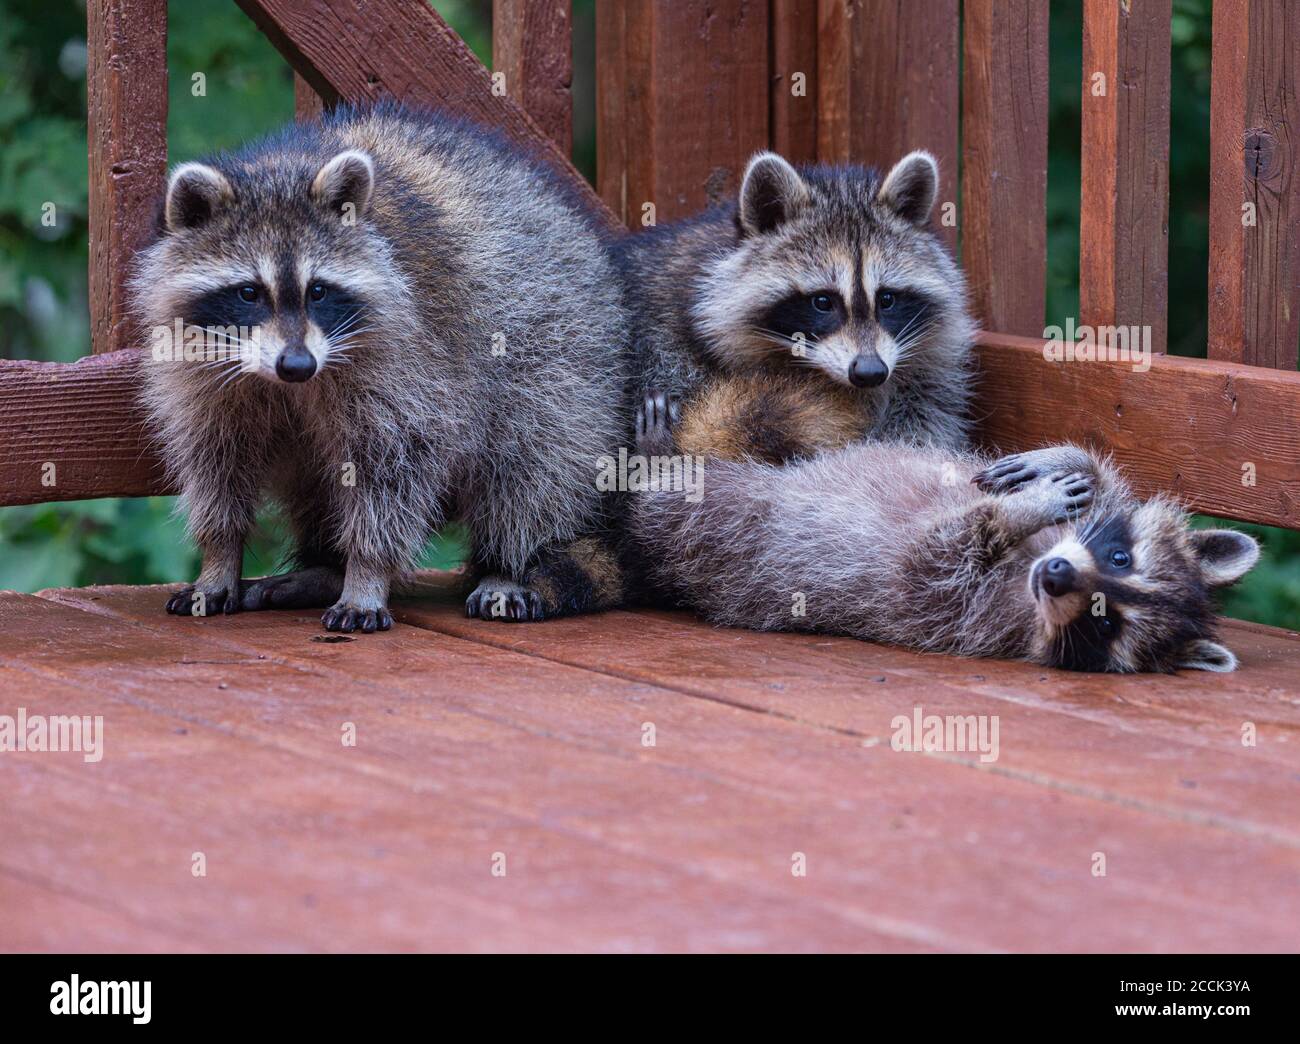 Three young raccoons relaxing on a weathered wooden deck. Stock Photo